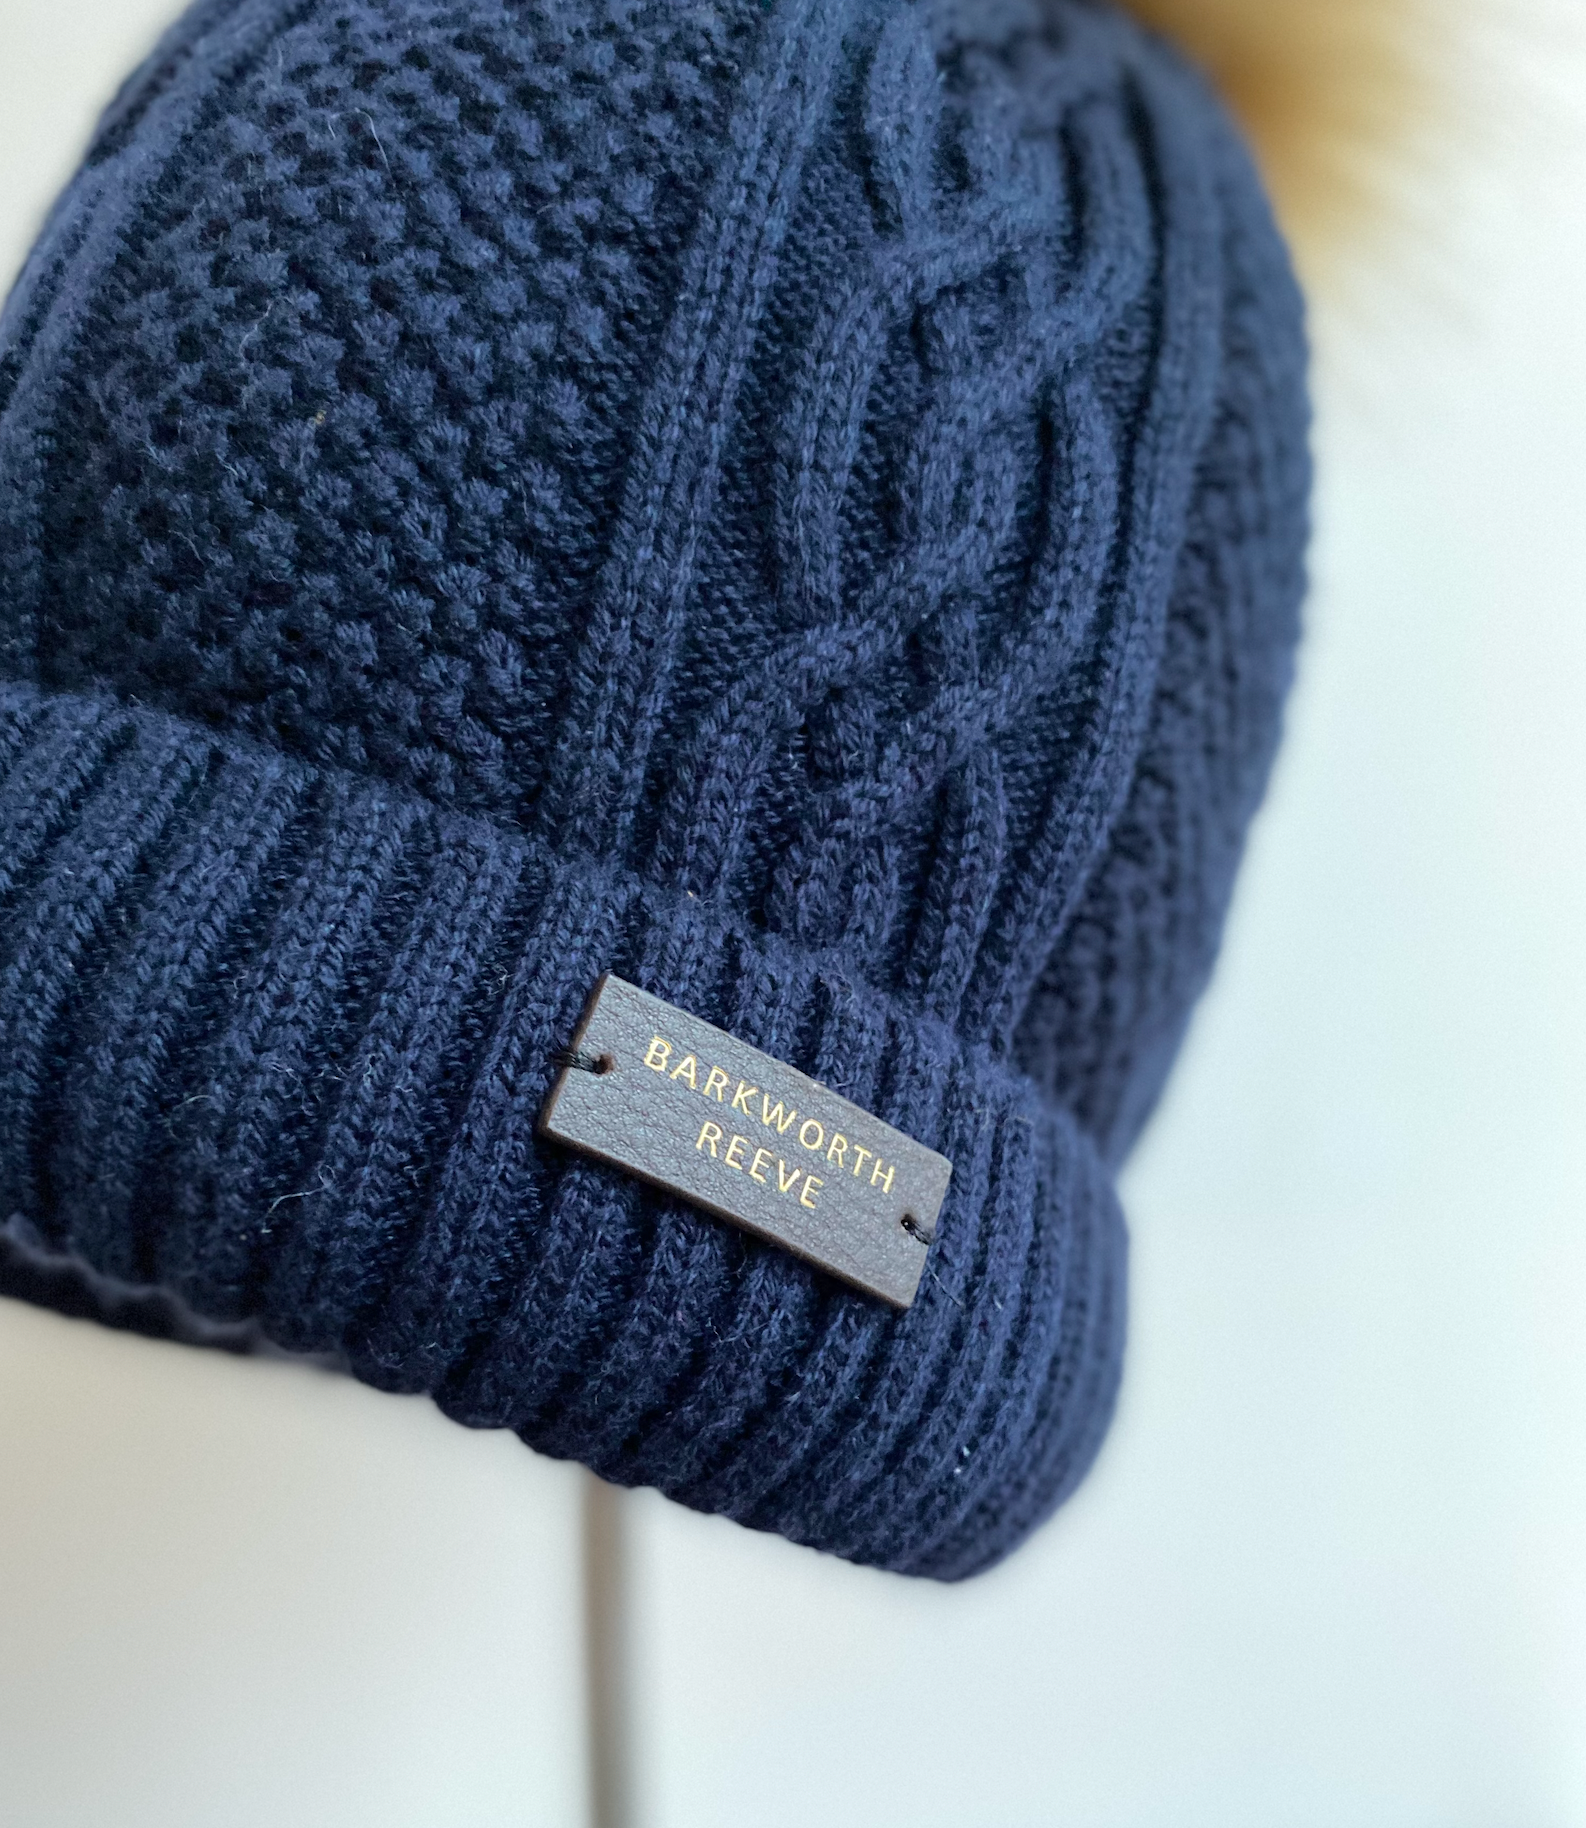 Knitted, Lined Bobble Hat in  Navy Blue Cashmere, Wool & Cotton Mix Yarn